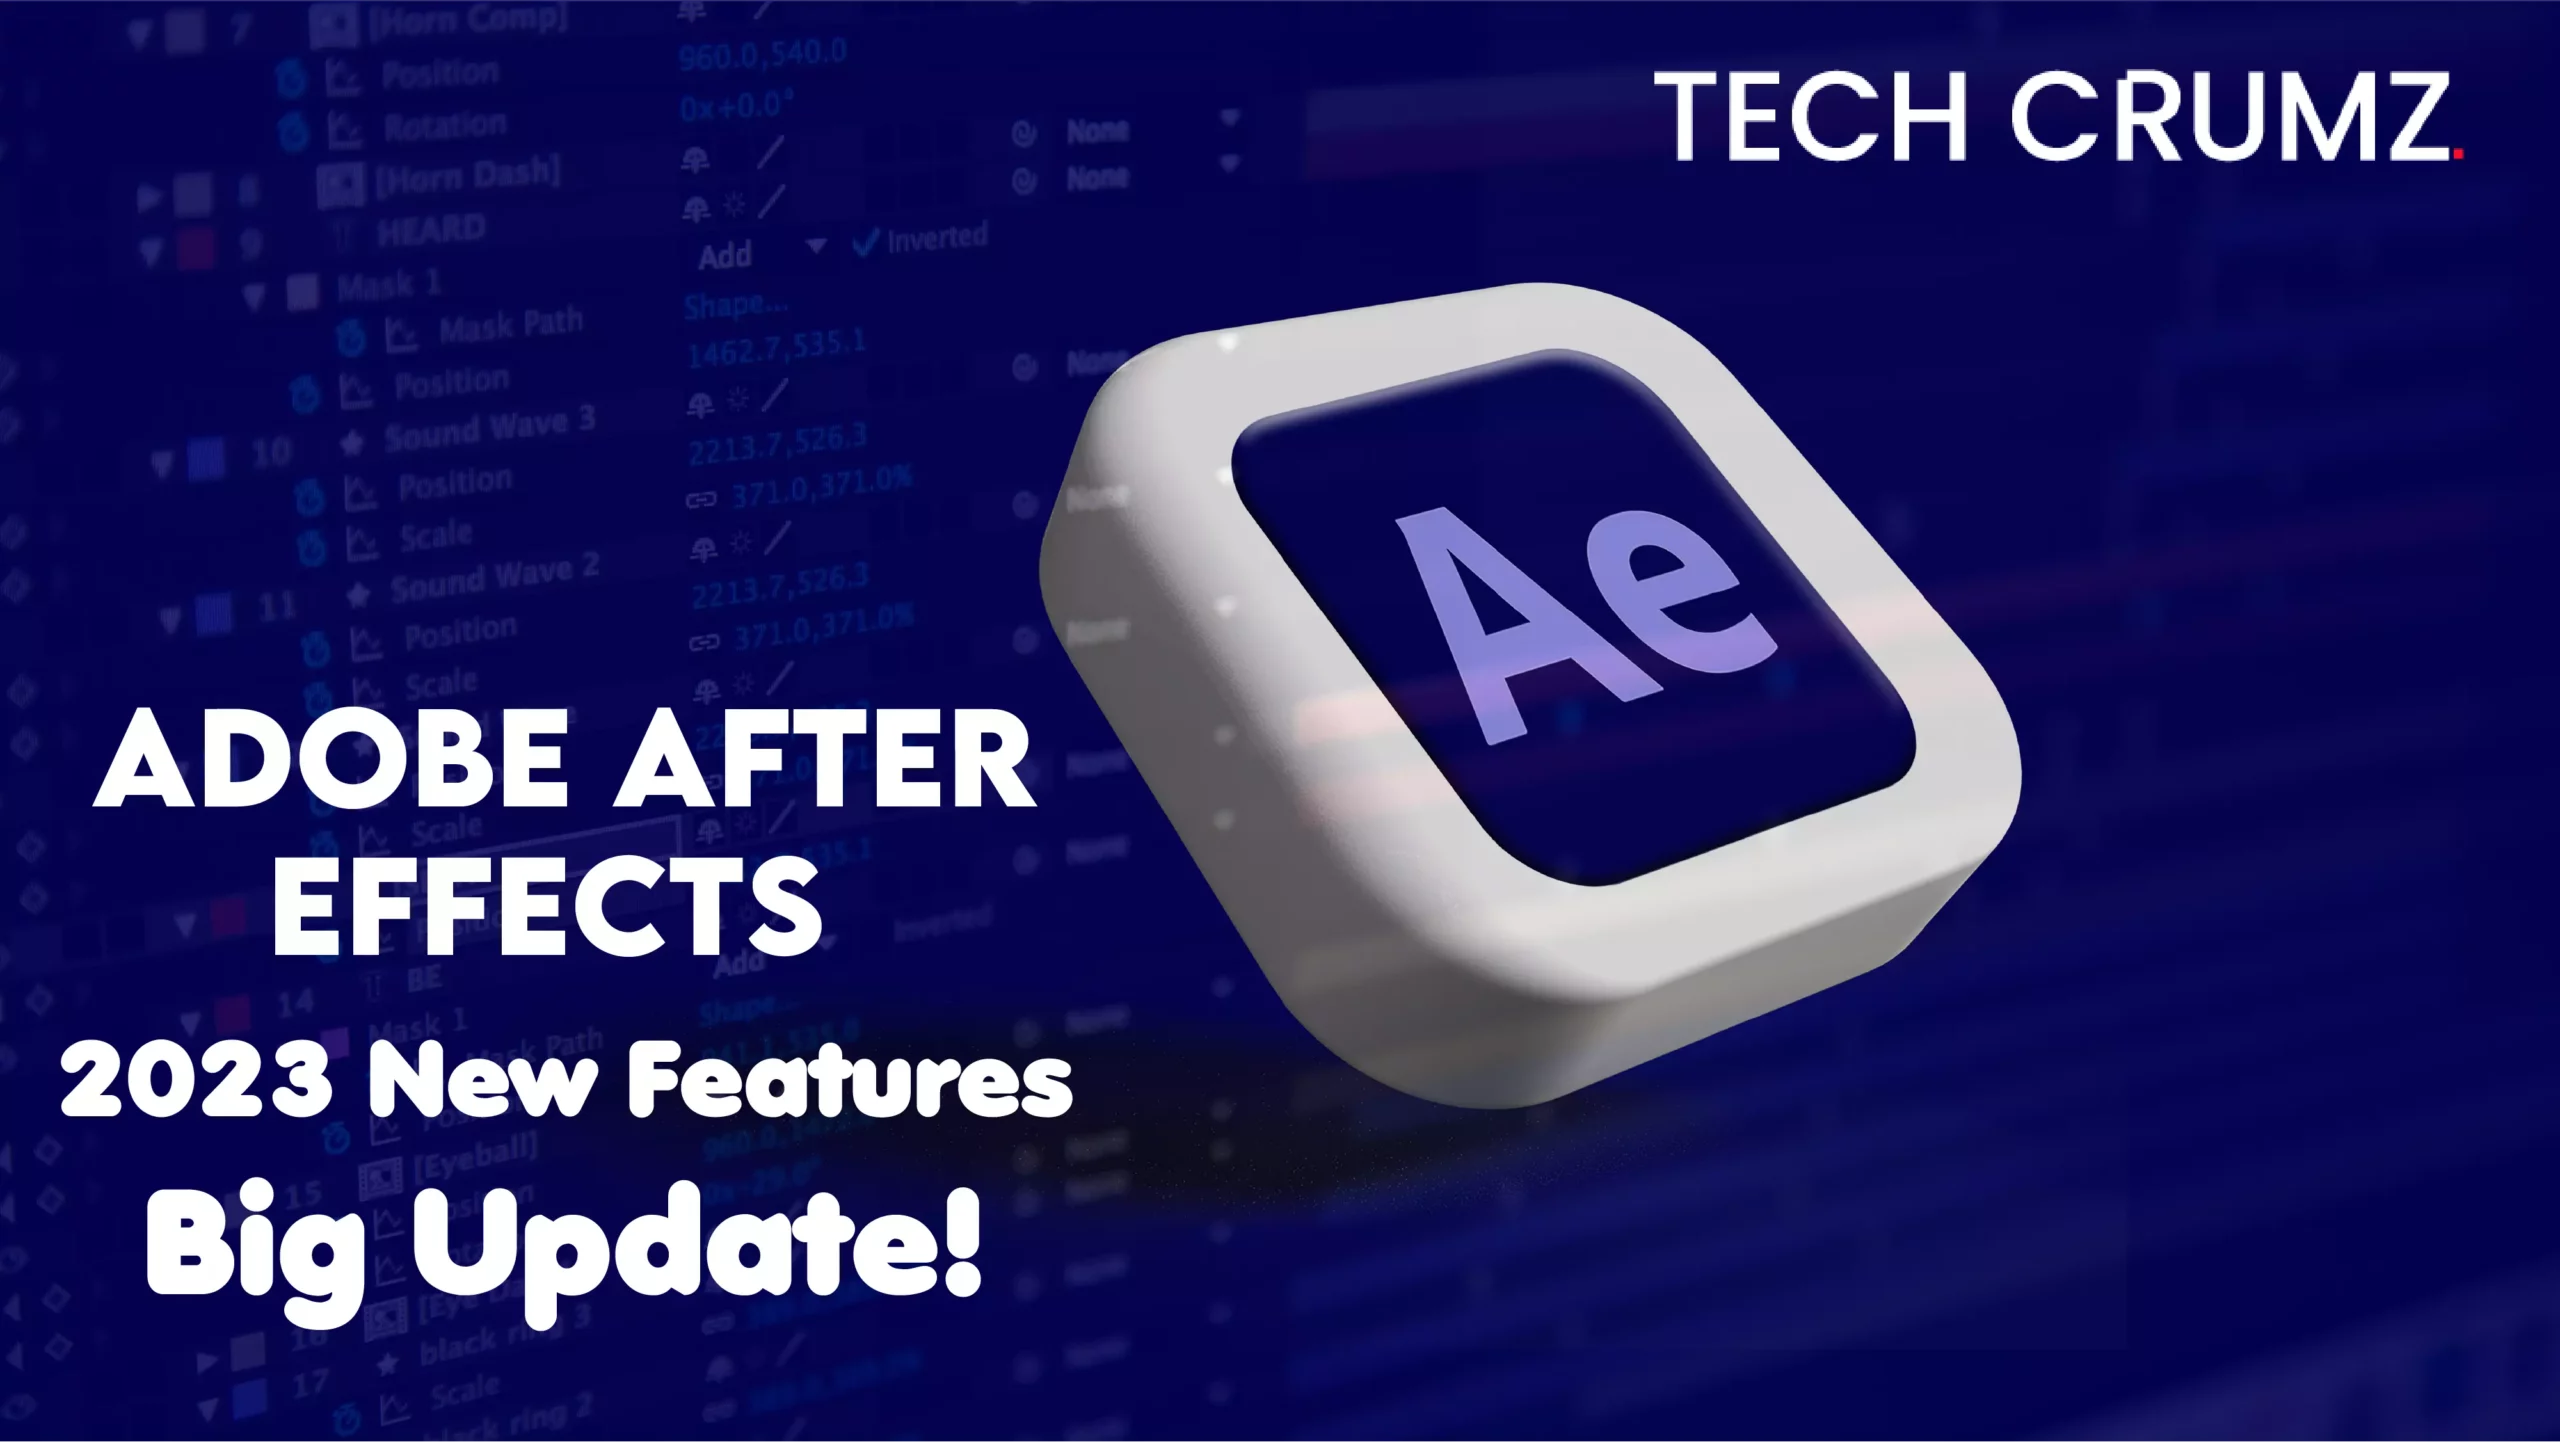 Explore the exciting features of Adobe After Effects 2023